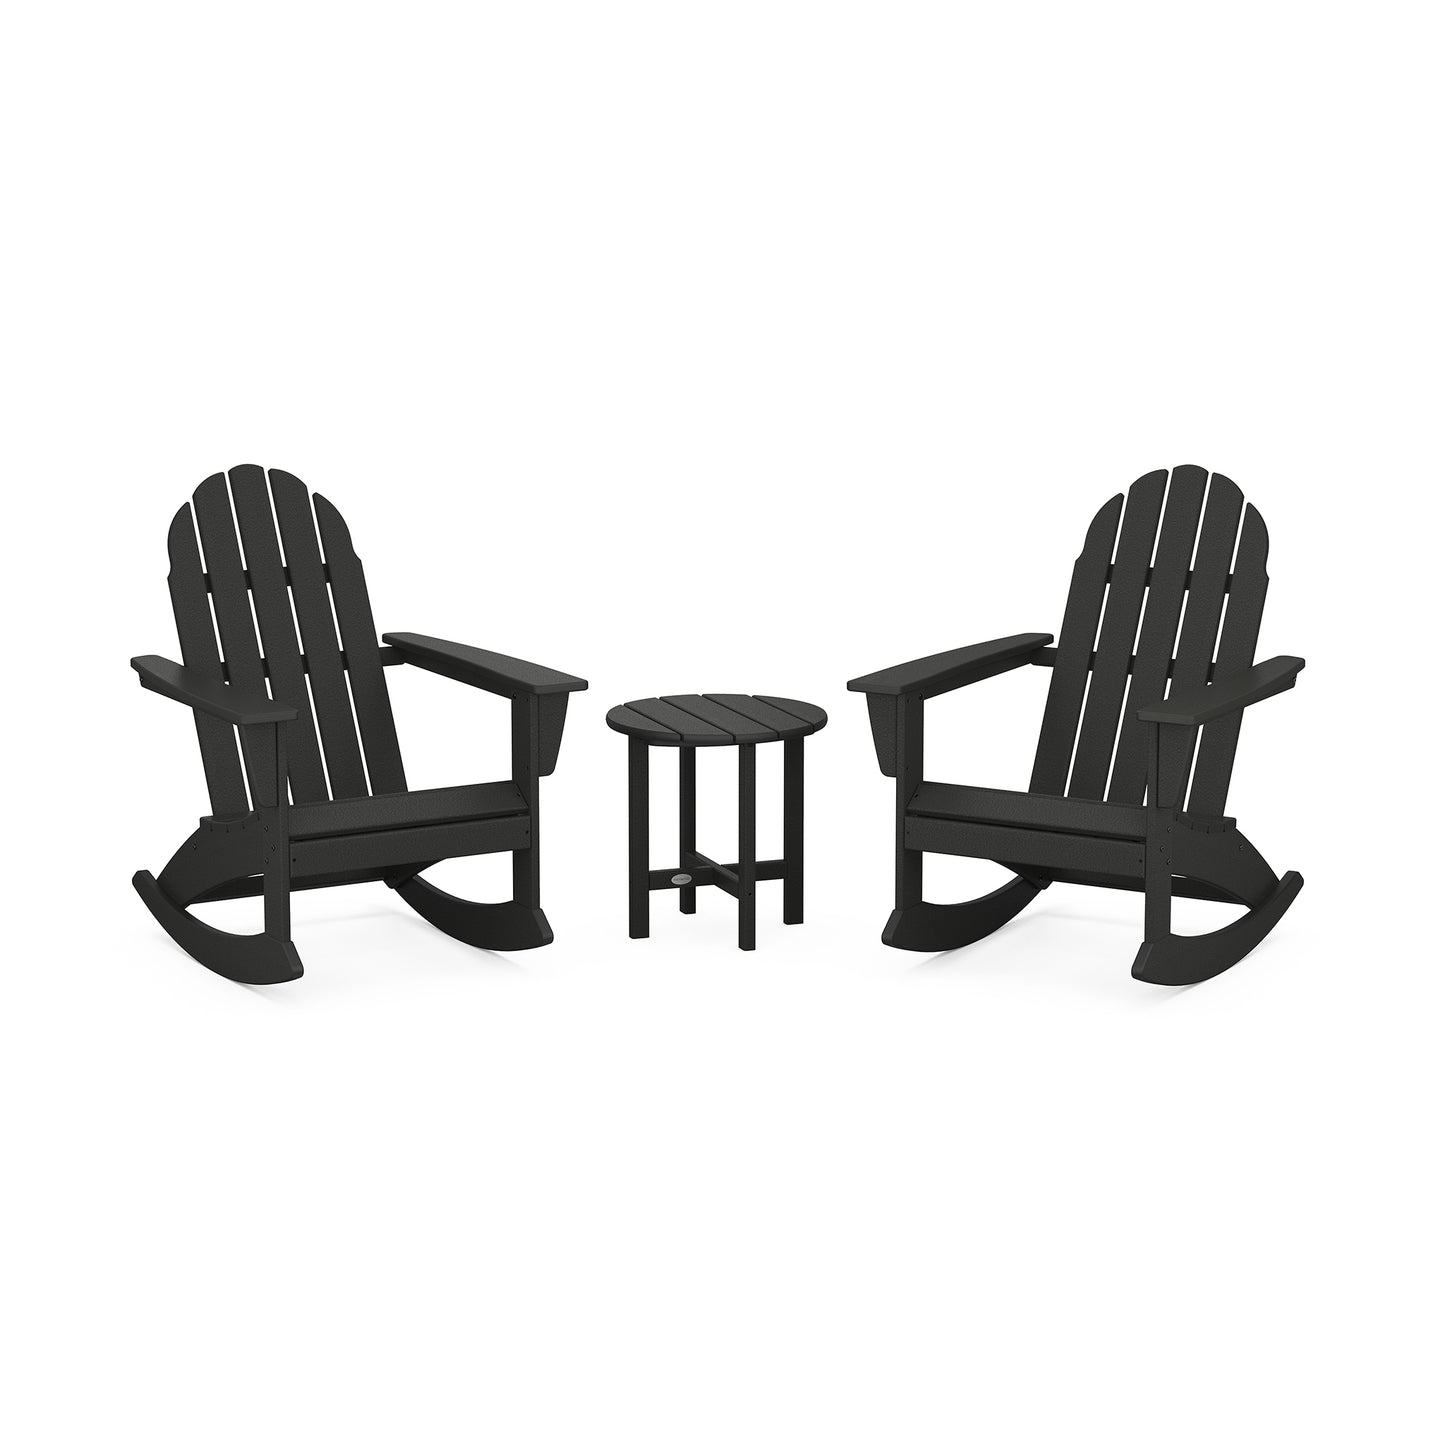 Two black POLYWOOD Vineyard 3-Piece Adirondack rocking chairs facing each other with a small round table between them, isolated on a white background.